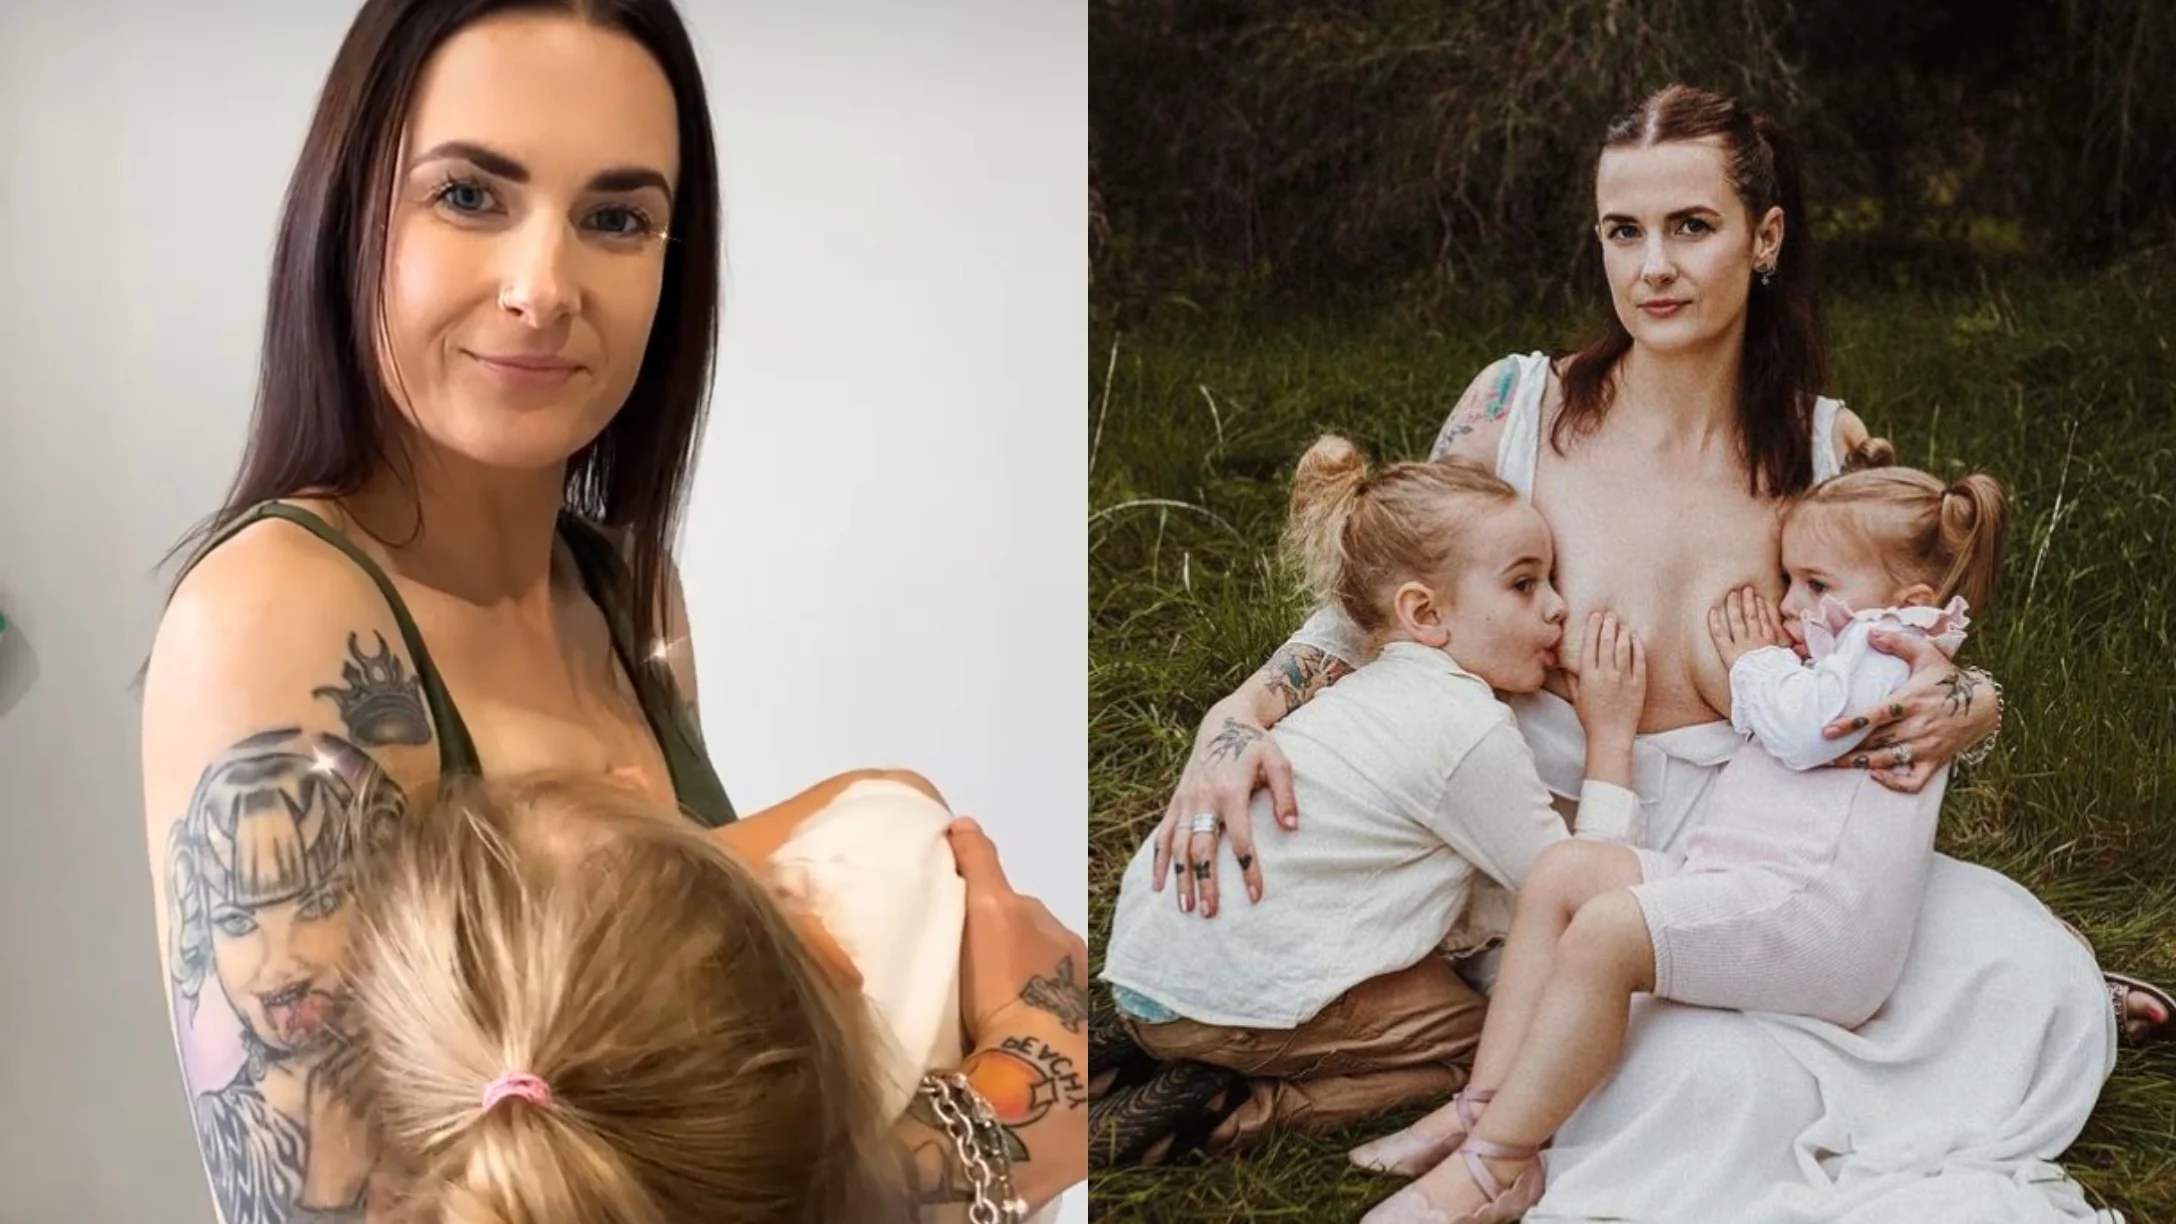 This mum's Instagram about her breastfeeding boobs is so relatable